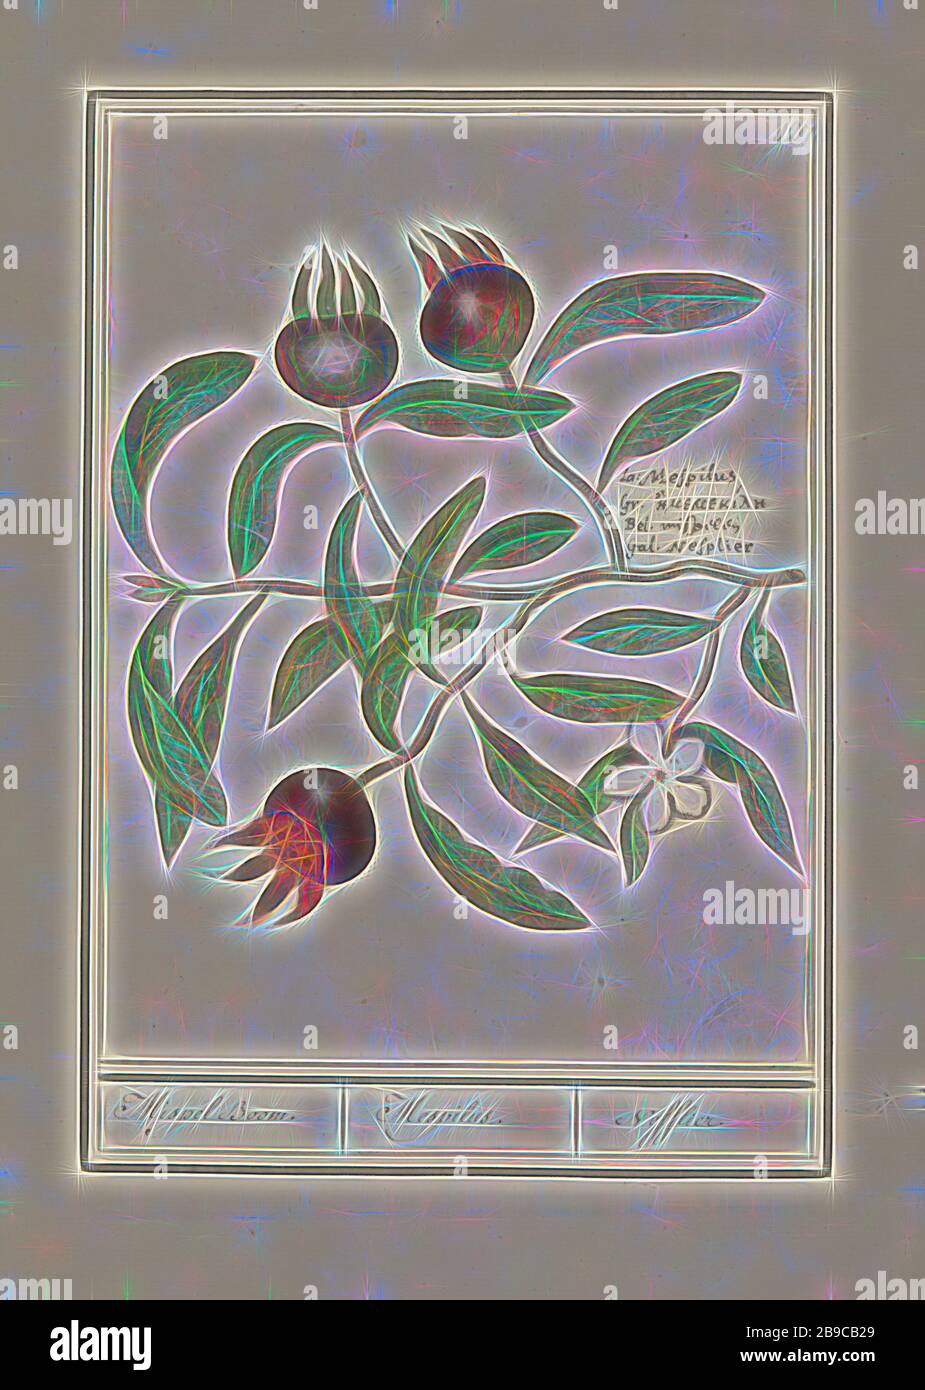 Mispel (Mespilus germanica) Mispel Boom. / Mespilus. / Nefflier (title on object), Medlar, branch with leaves, flower and fruits. Numbered top right: 127. Right the name in four languages. Part of the second album with drawings of flowers and plants. Ninth of twelve albums with drawings of animals, birds and plants known around 1600, commissioned by Emperor Rudolf II. With explanations in Dutch, Latin and French., Fruits: medlar, Anselmus Boetius de Boodt, 1596 - 1610, paper, watercolor (paint), deck paint, ink, chalk, pen, h 237 mm × w 177 mm, Reimagined by Gibon, design of warm cheerful glow Stock Photo